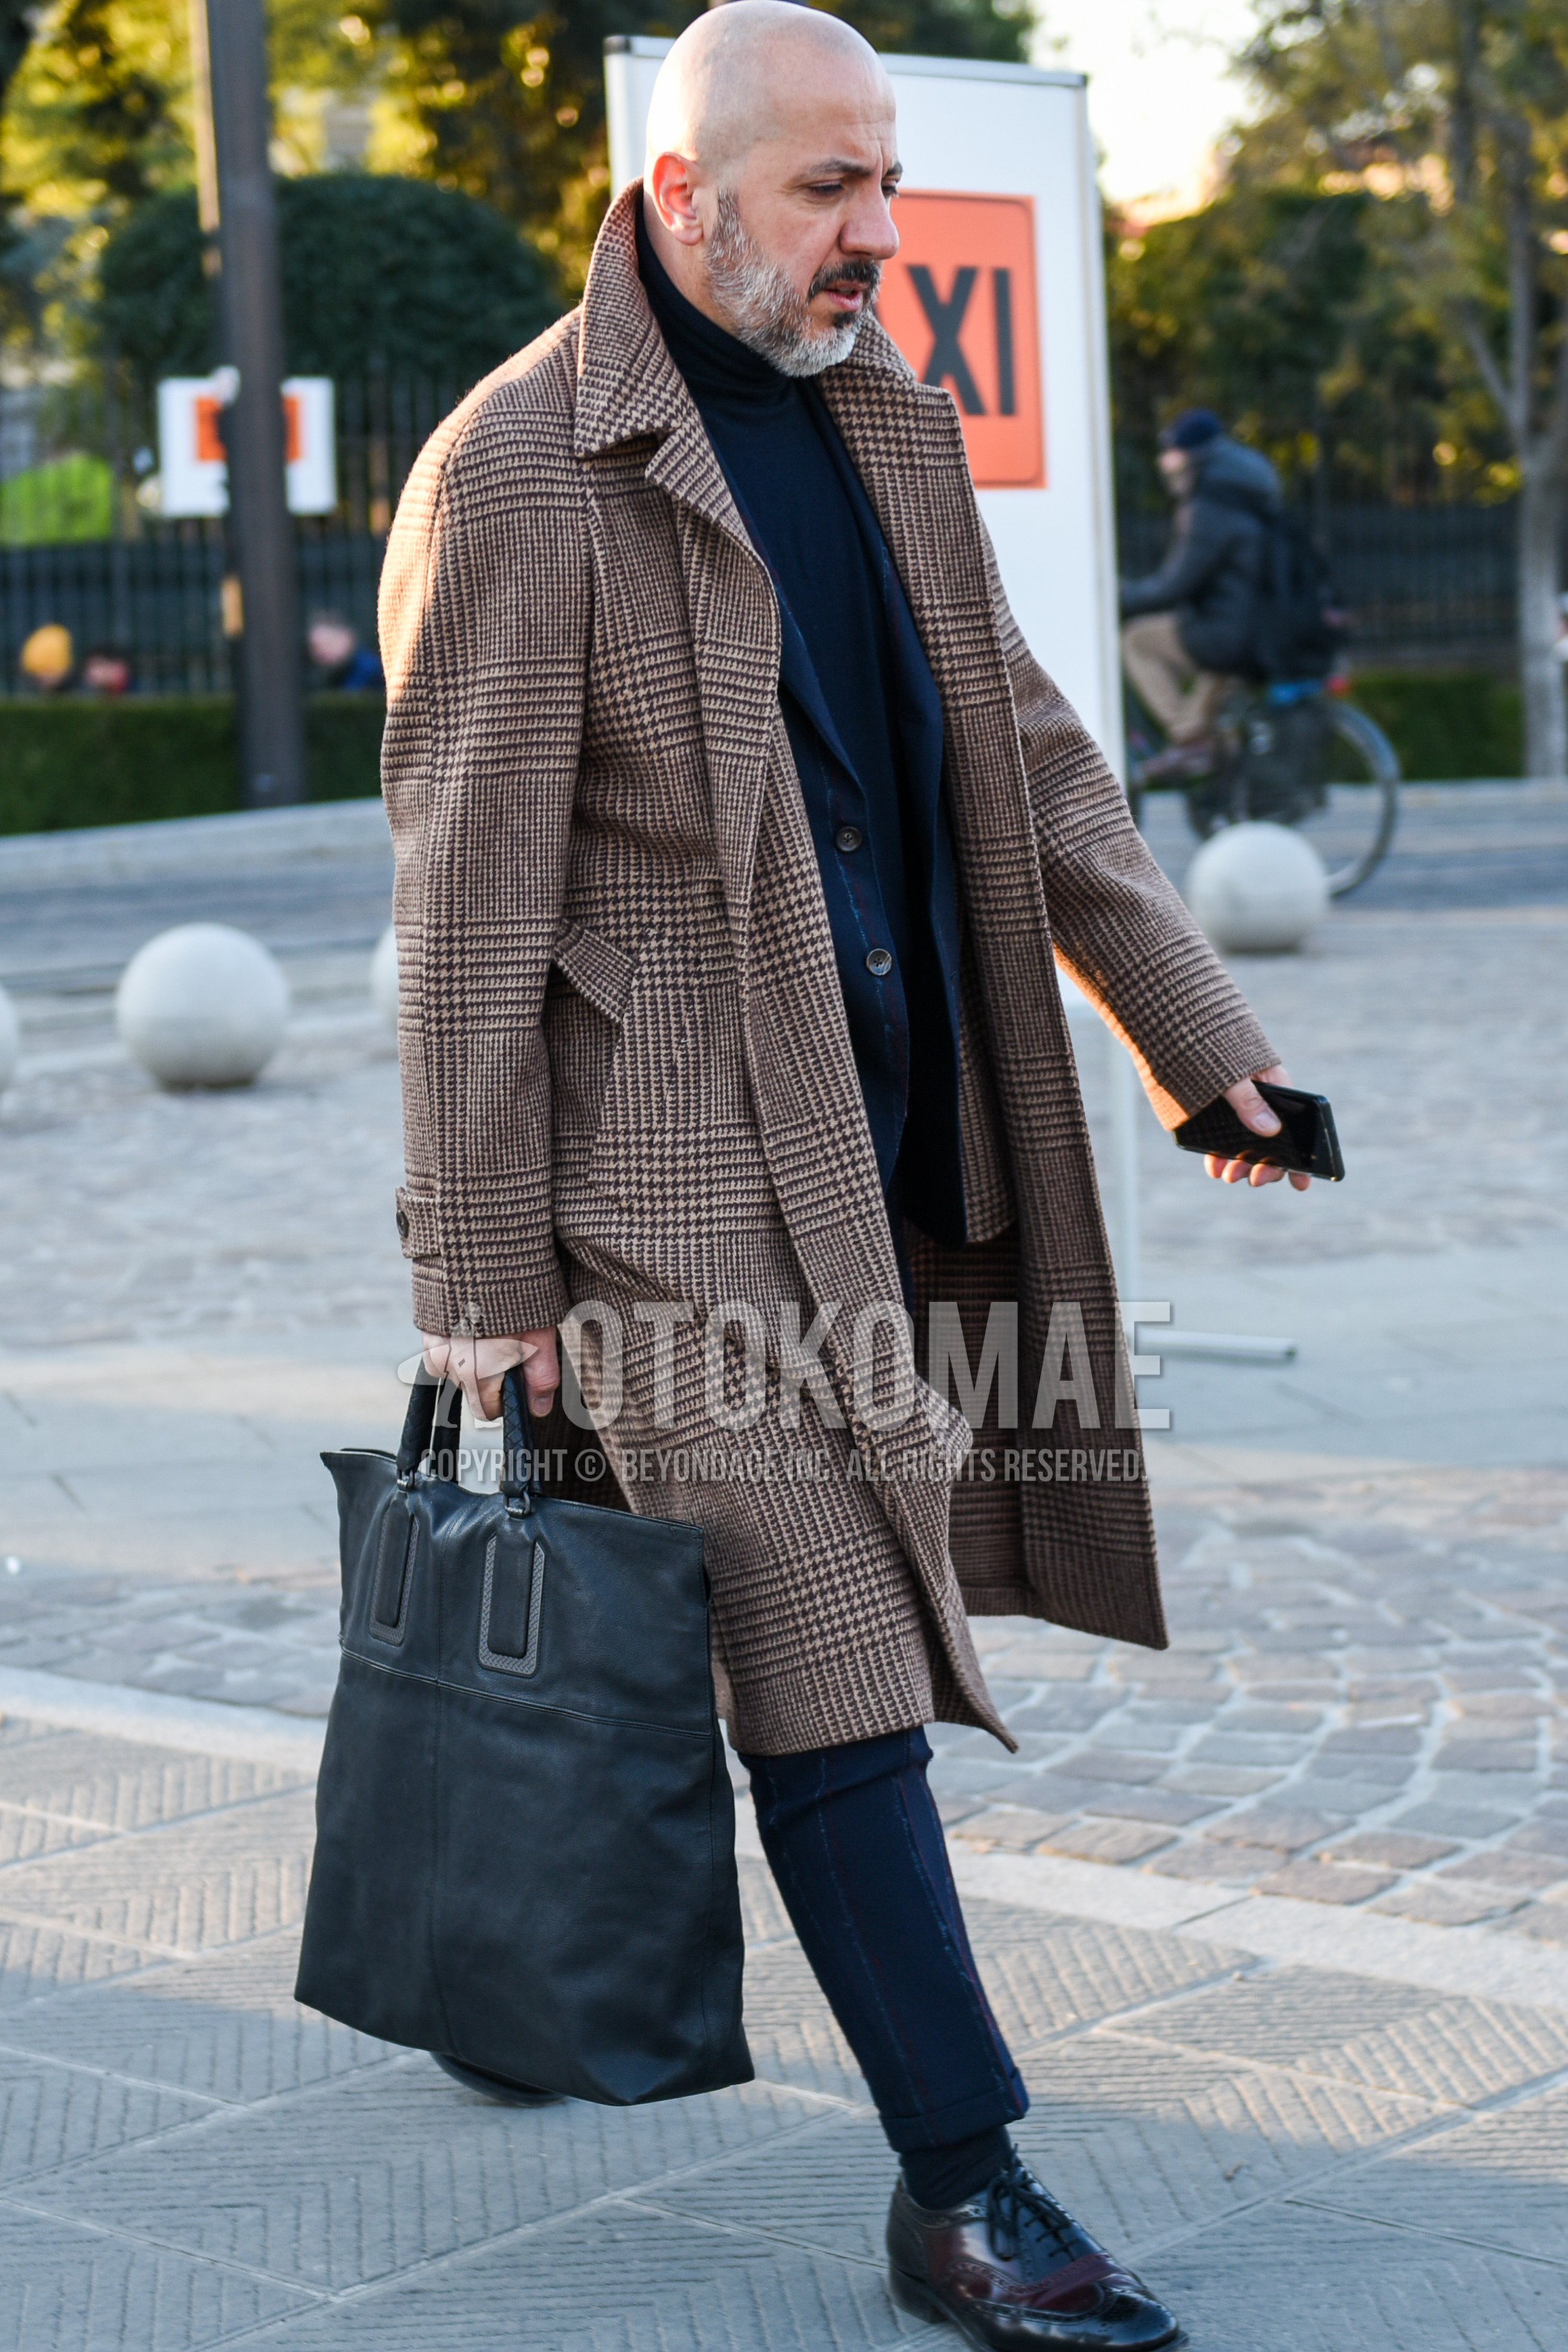 Men's autumn winter outfit with brown check trench coat, navy plain turtleneck knit, brown wing-tip shoes leather shoes, gray plain briefcase/handbag, gray stripes suit.